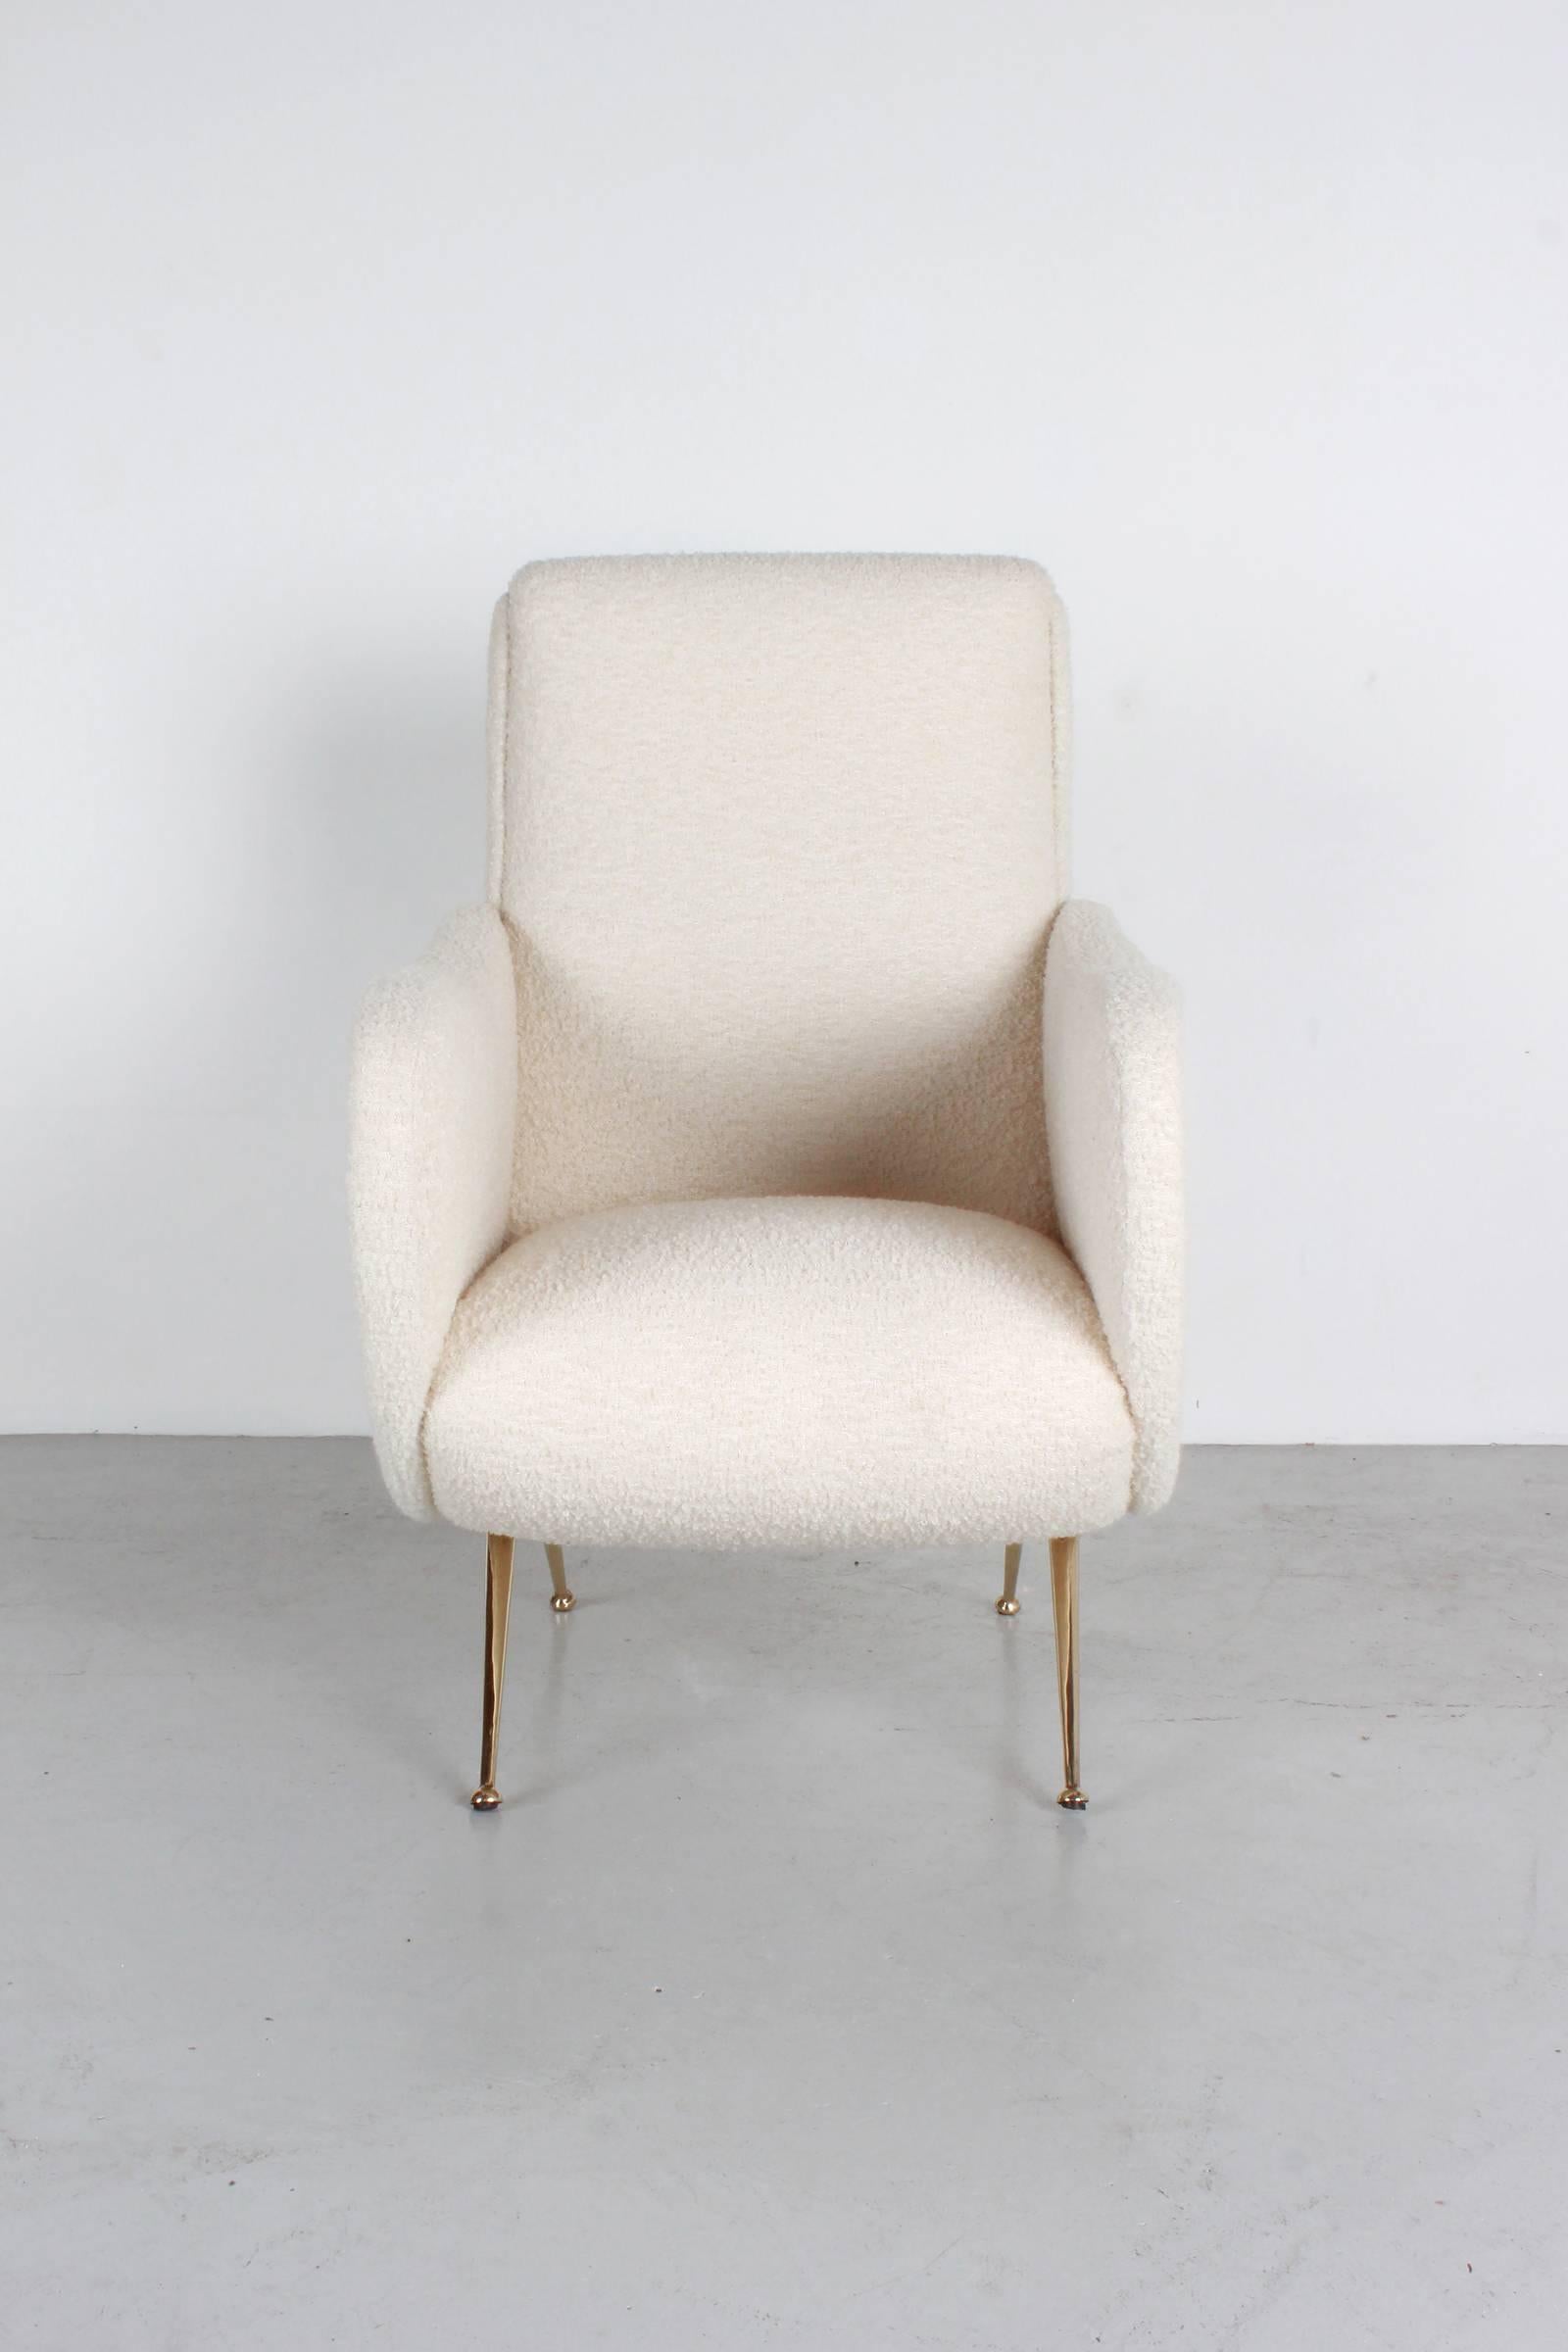 Pair of Italian club chairs in the style of Marco Zanuso upholstered in creamy white bouclé with newly polished brass tapered legs.